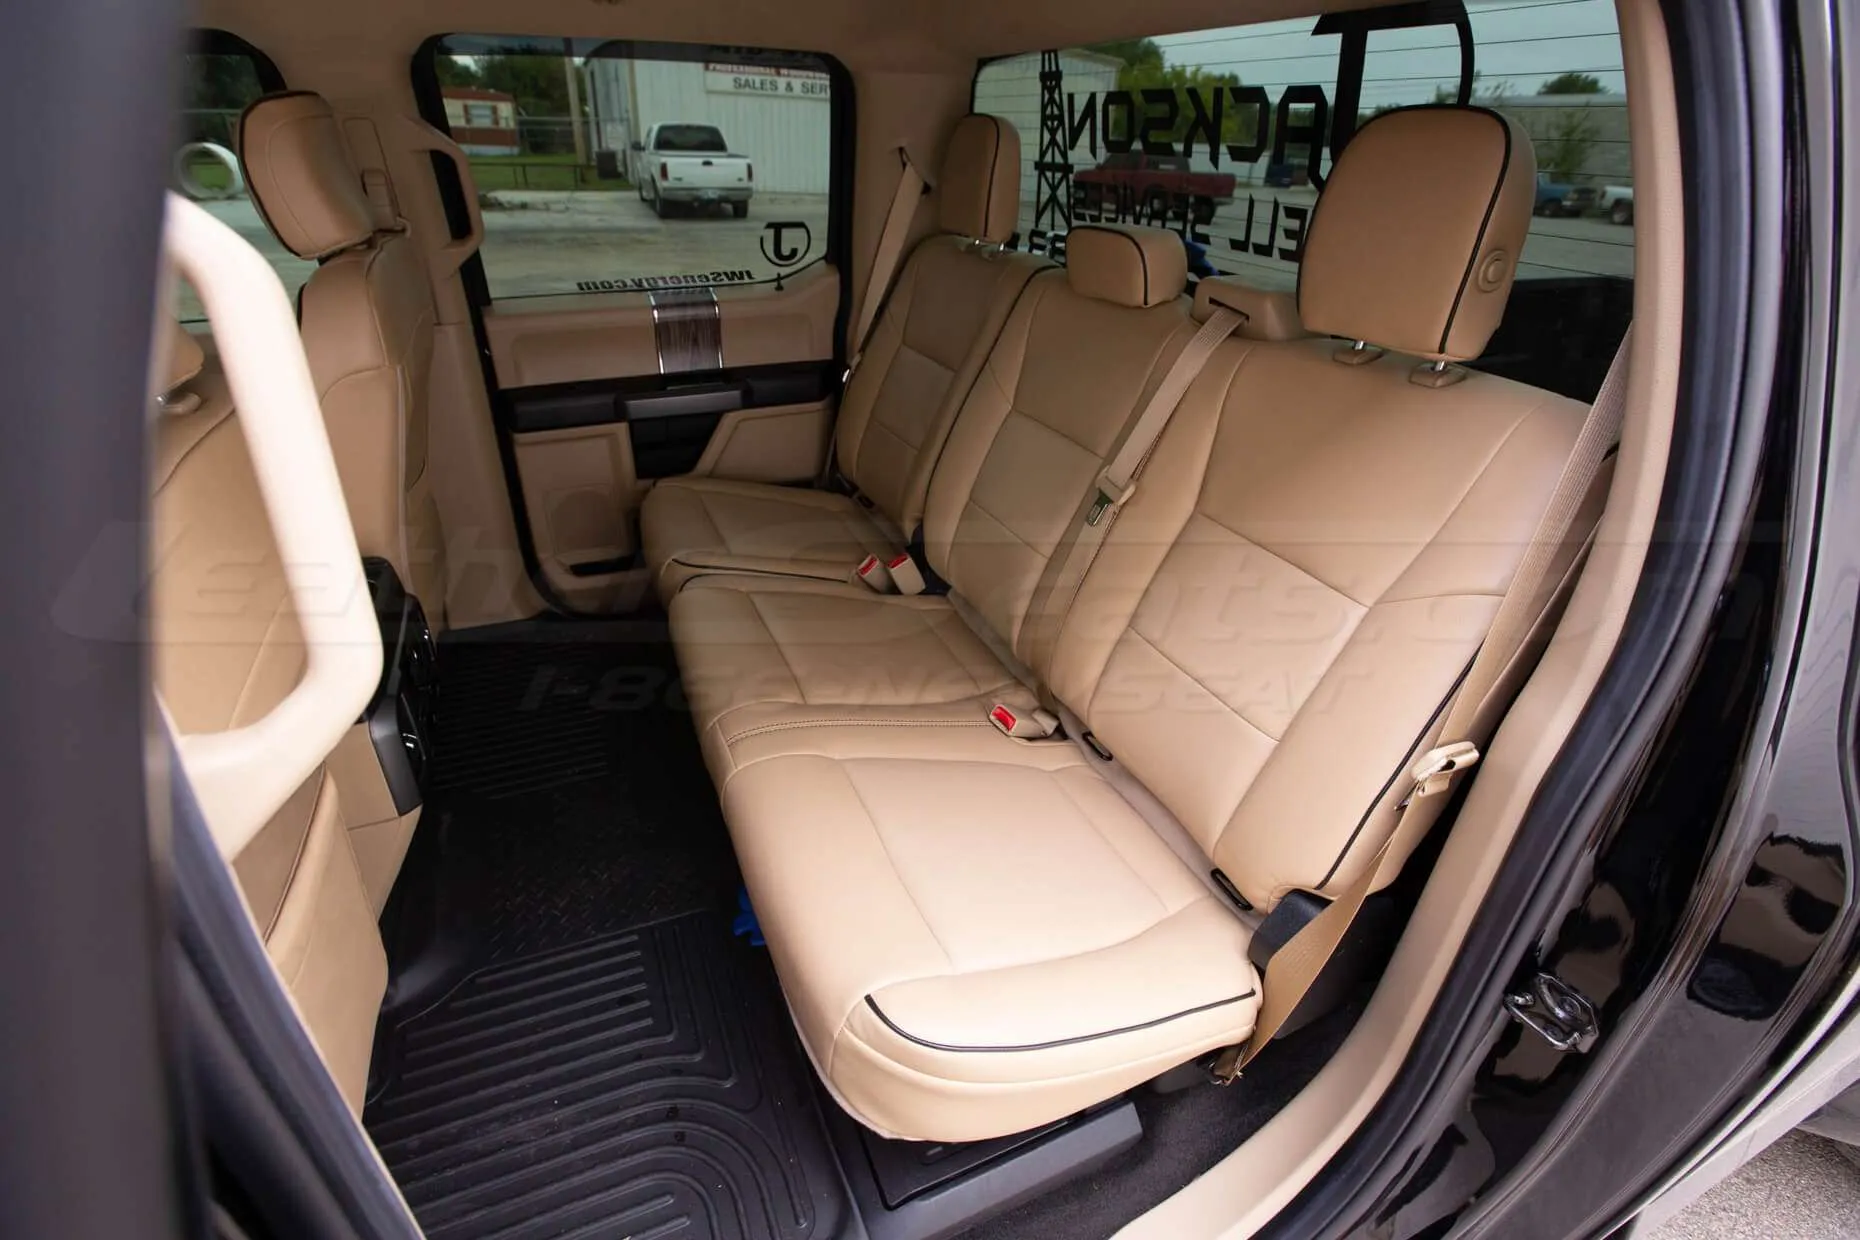 Ford Superduty Leather Seats - Installed - Rear seats